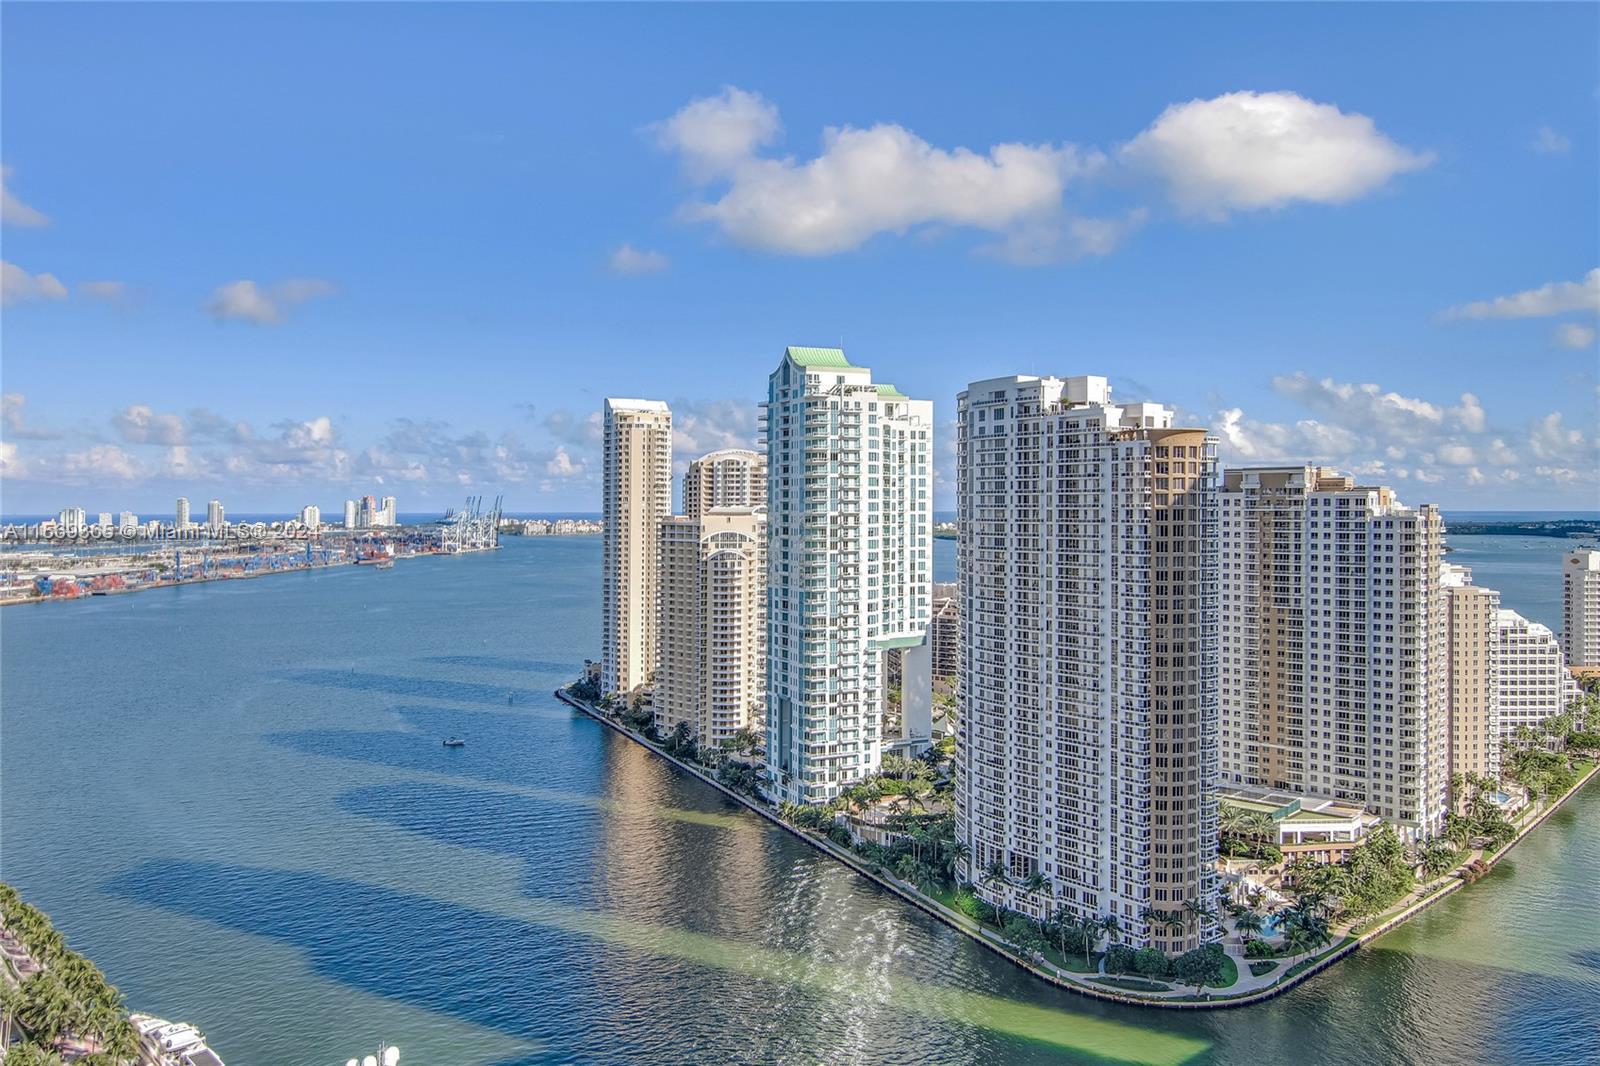 One of the best condo buildings on Brickell Key with water and city views. The unit has high ceilings , open kitchen, new A/C, new water heater and 2 parking spaces which is a rare find. The building offers great amenities: tennis, gym, sauna, concierge, valet, pool, party room. Easy to show.  Show it with pride